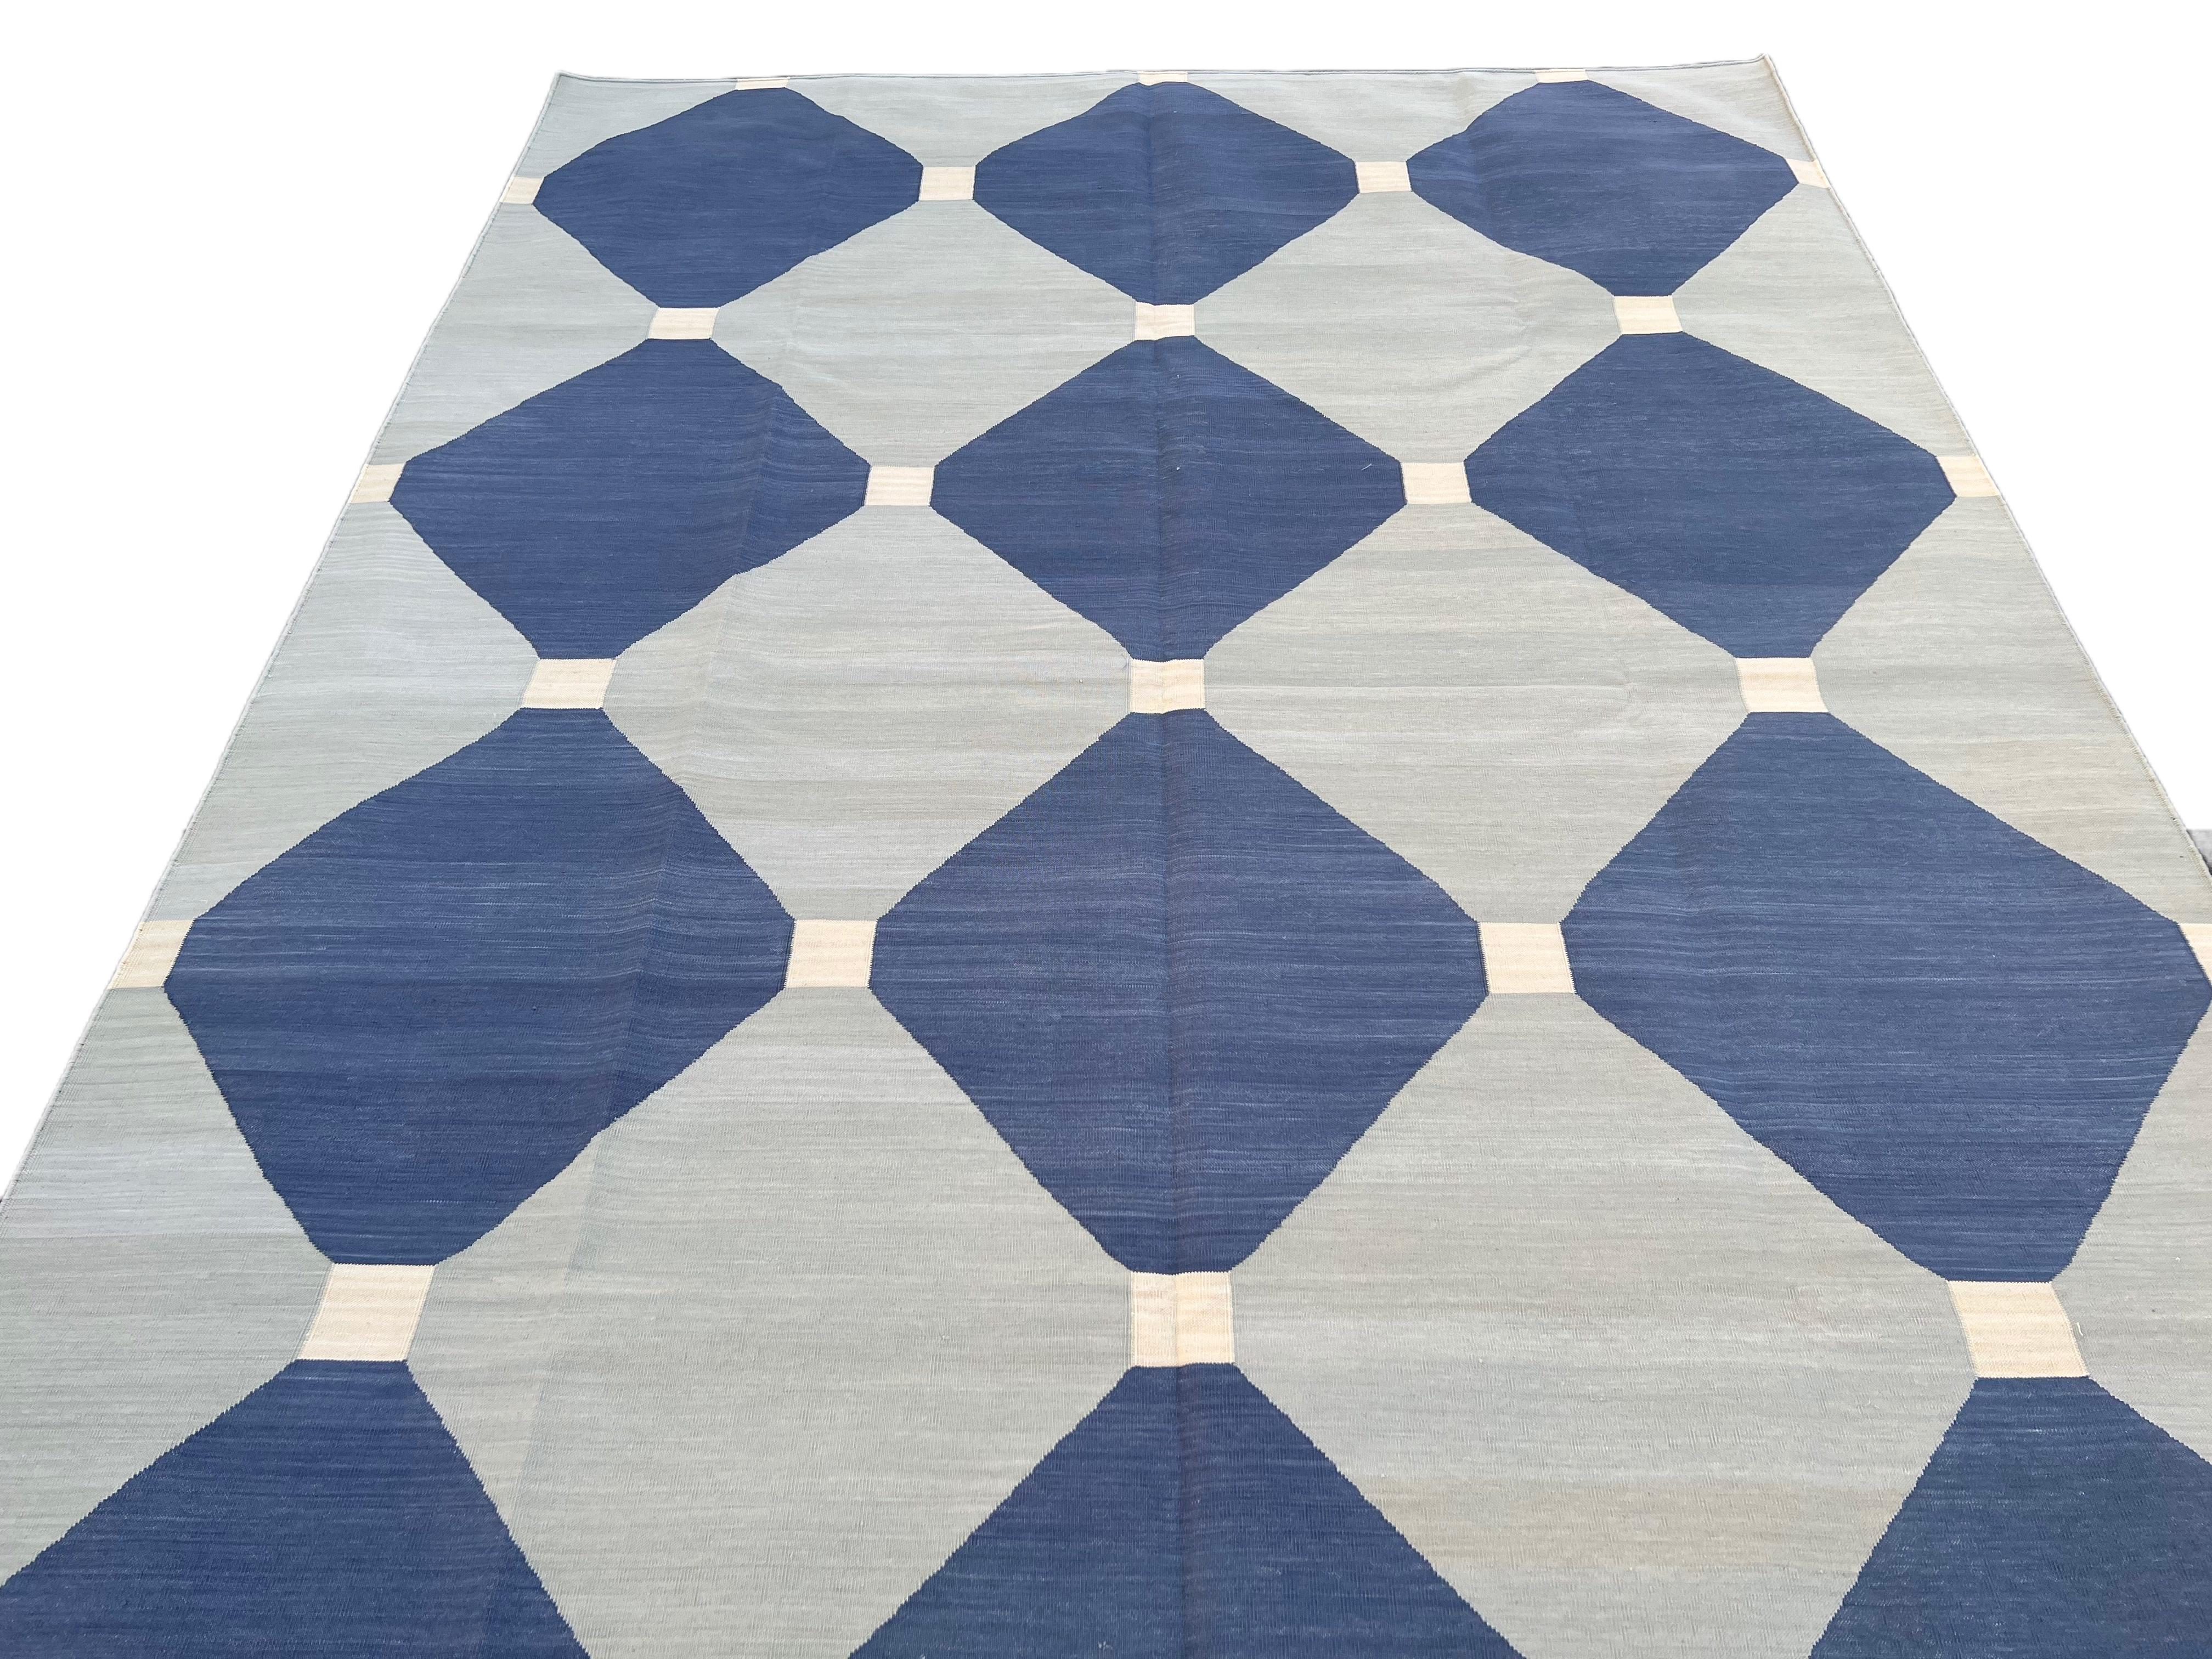 Handmade Cotton Area Flat Weave Rug, 6x9 Grey And Blue Tile Patterned Dhurrie For Sale 2